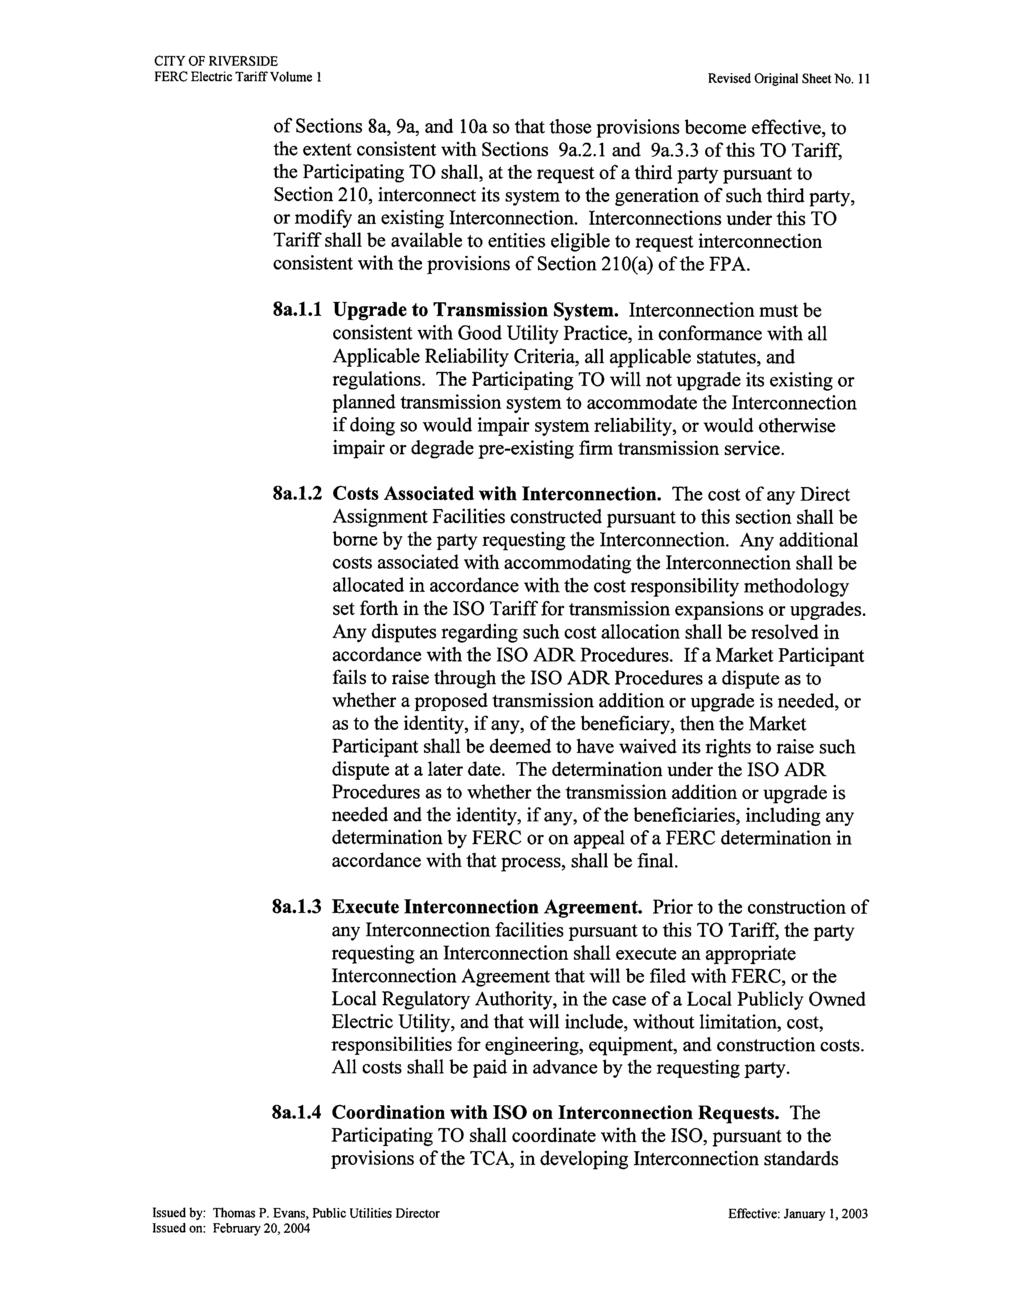 FERC Electric Tariff Volume 1 Revised Original Sheet No. 11 of Sections 8a, 9a, and 1 Oa so that those provisions become effective, to the extent consistent with Sections 9a.2.1 and 9a.3.